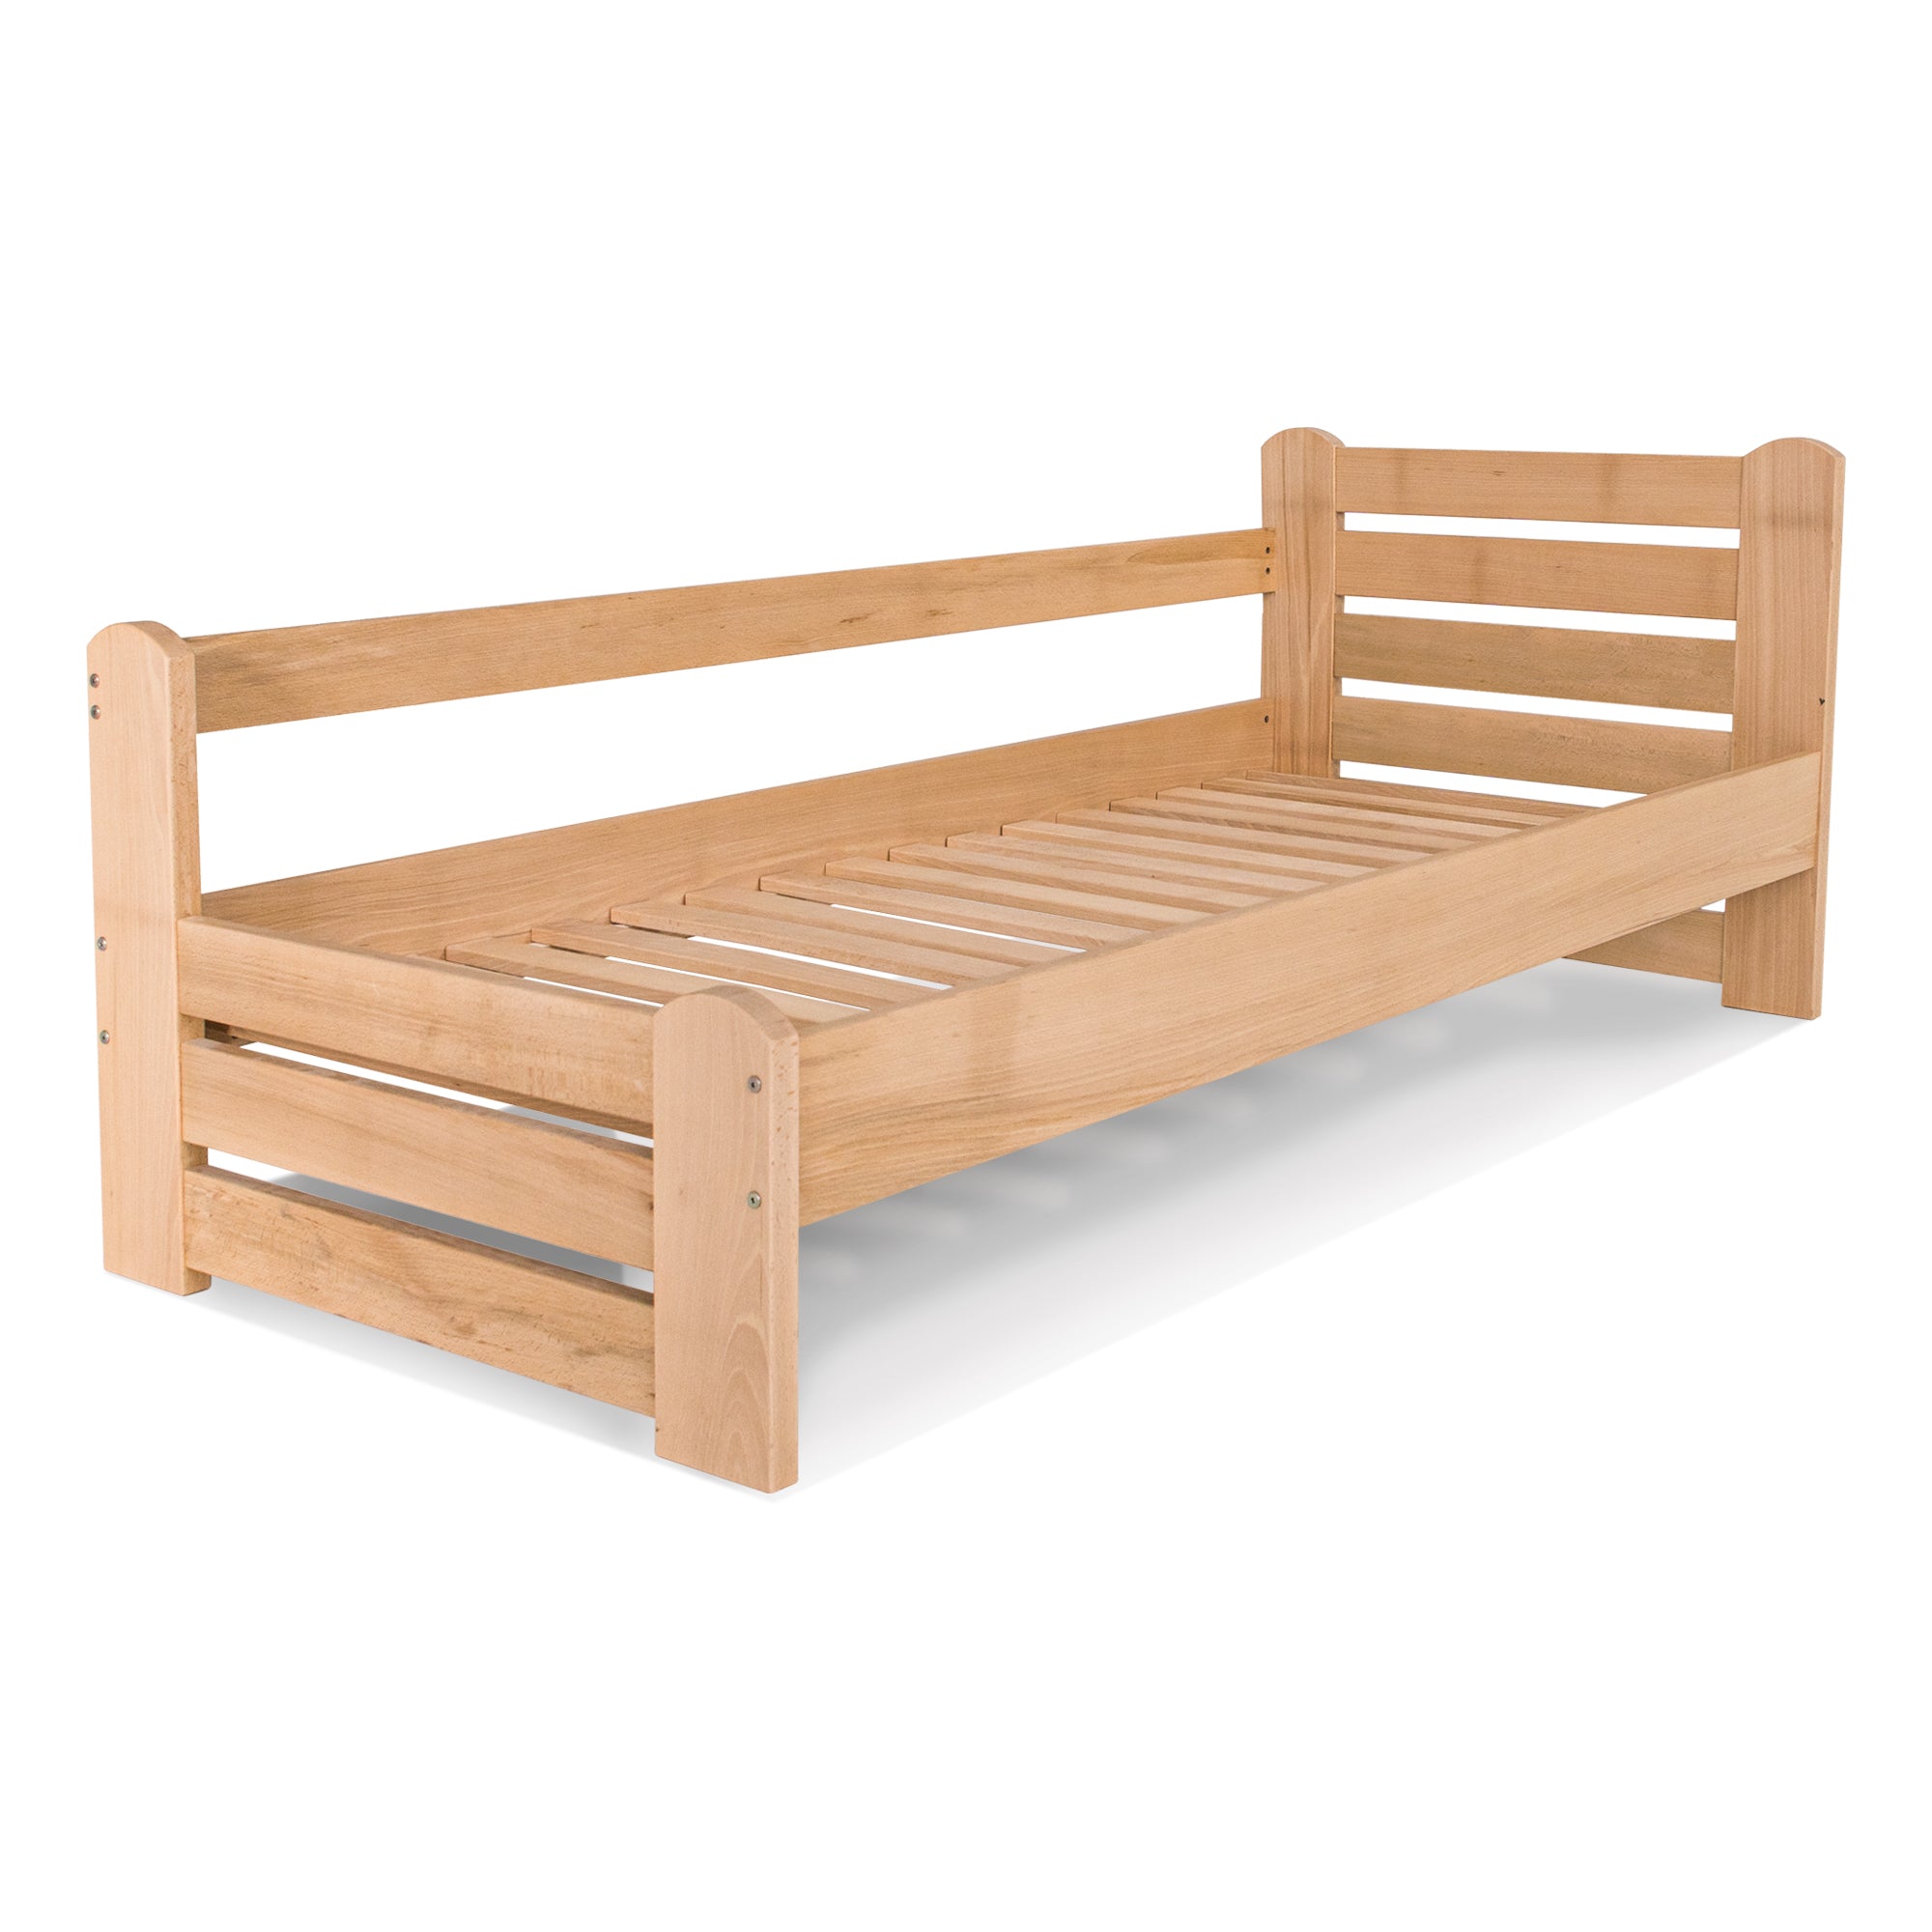 COUNTRY Single Bed with Safety Bar, Beech Wood-natural frame without mattress